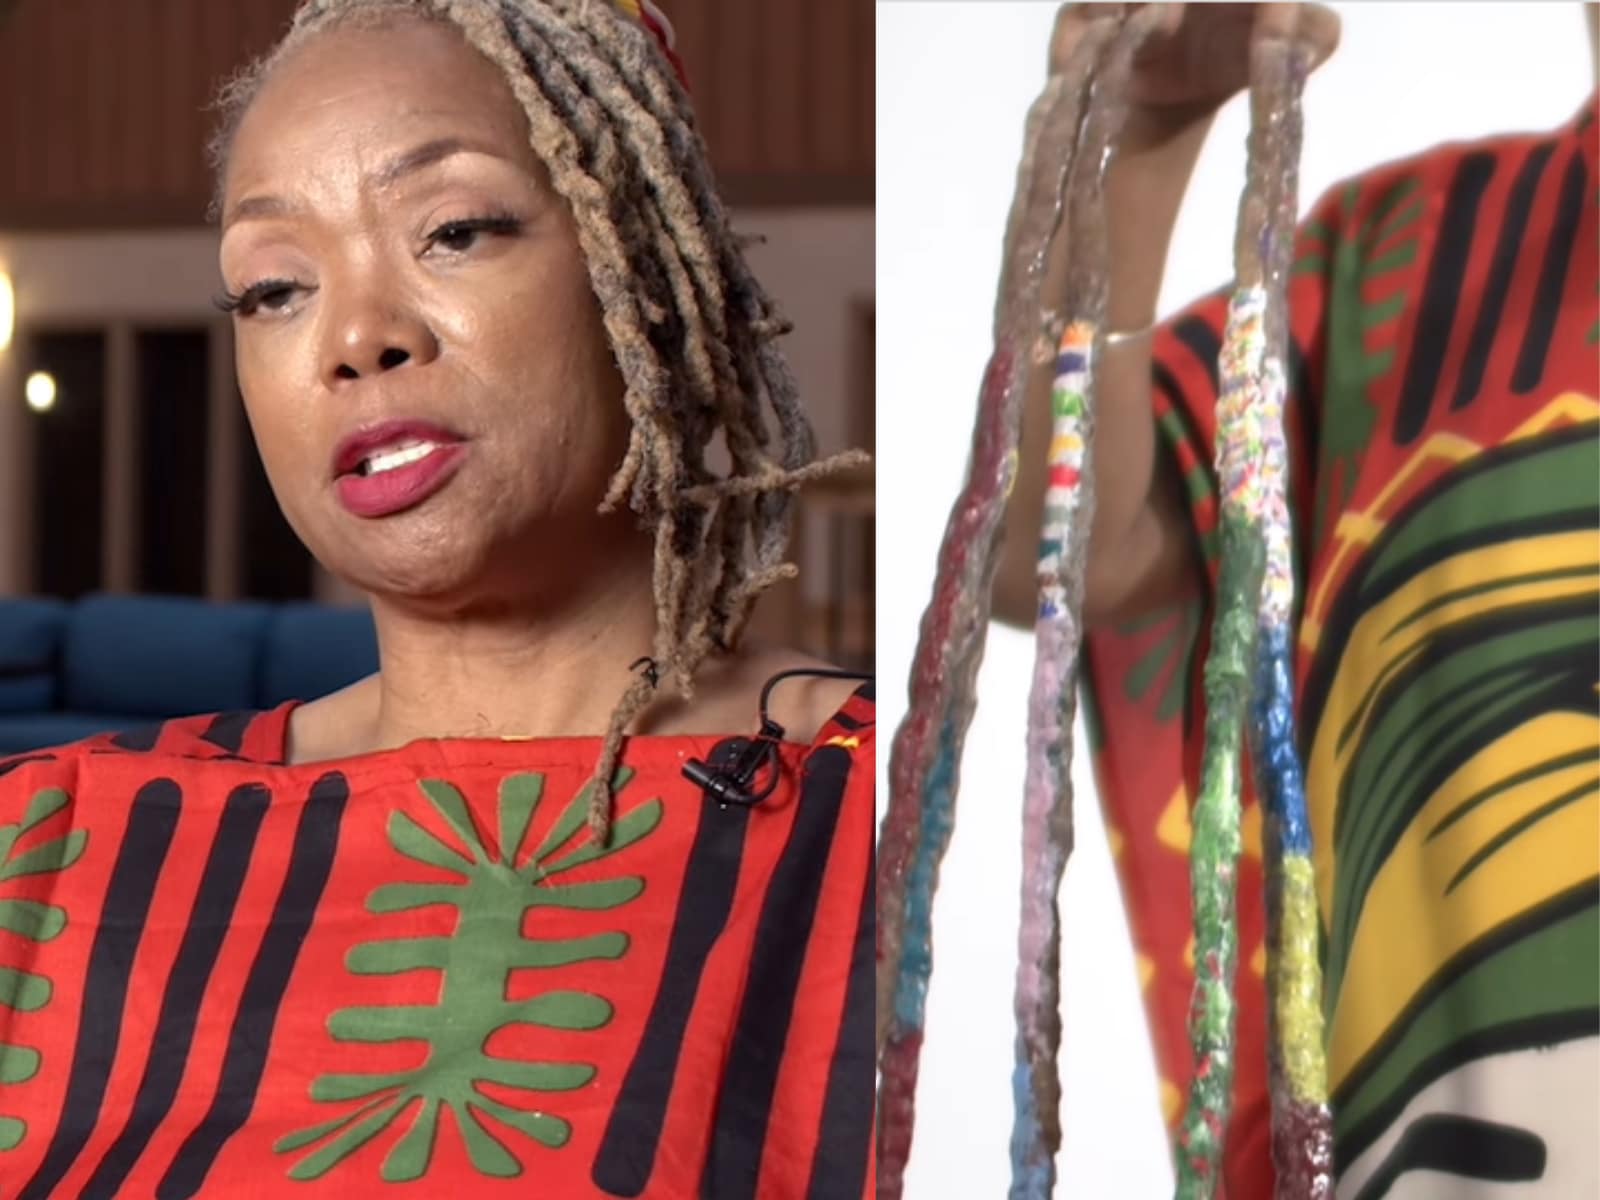 Longest Fingernails on 'To Tell The Truth' Haven't Been Cut Since 1990